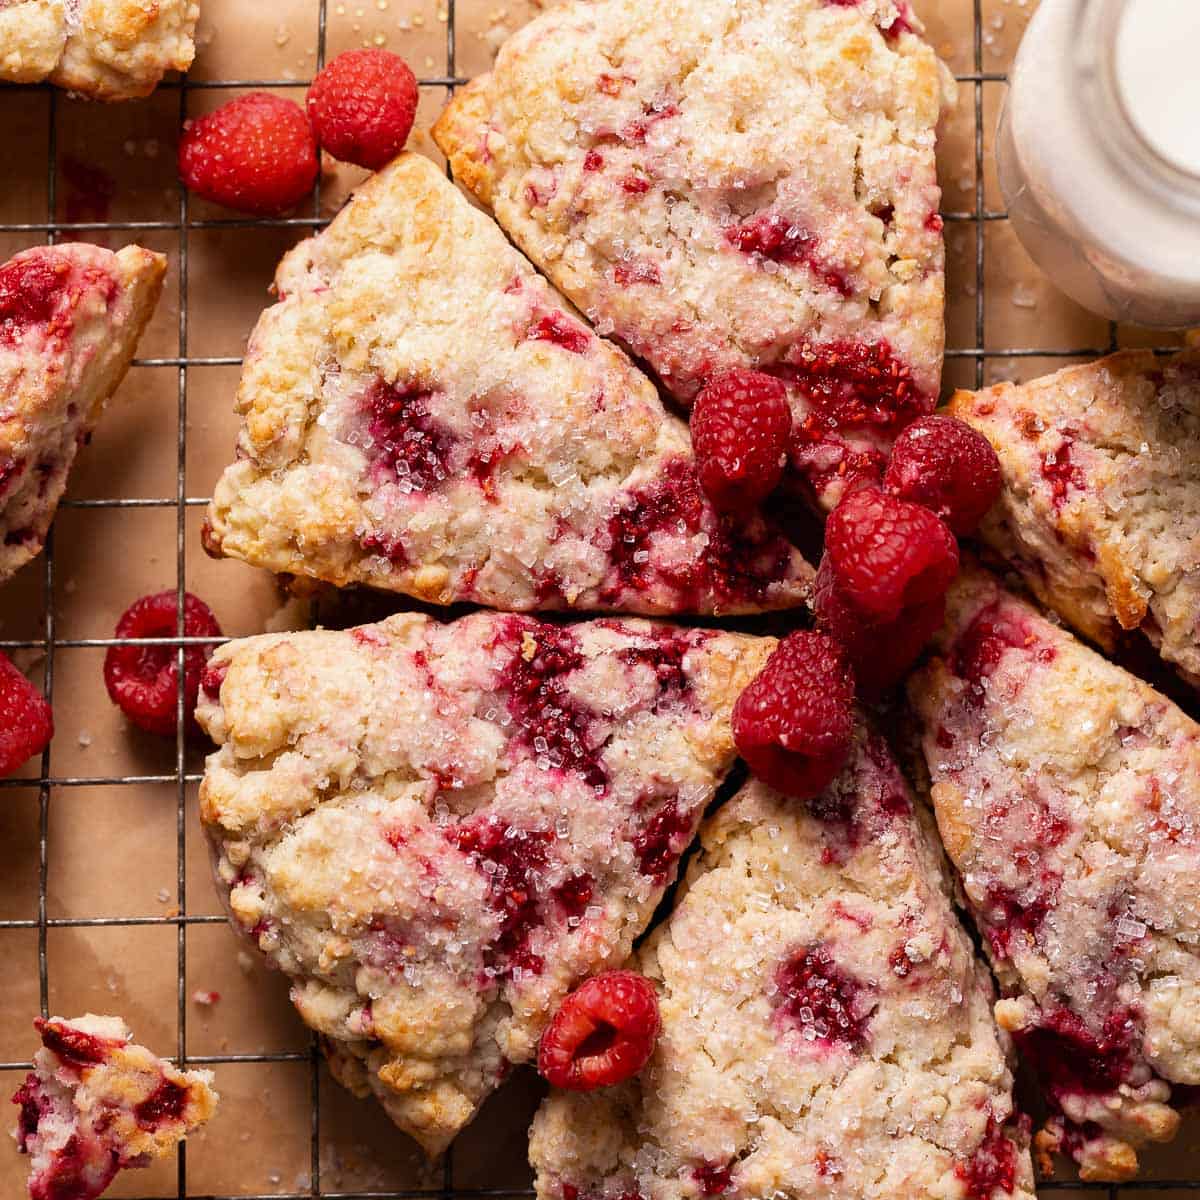 Raspberry scones topped with sugar and fresh raspberries on a wire rack.